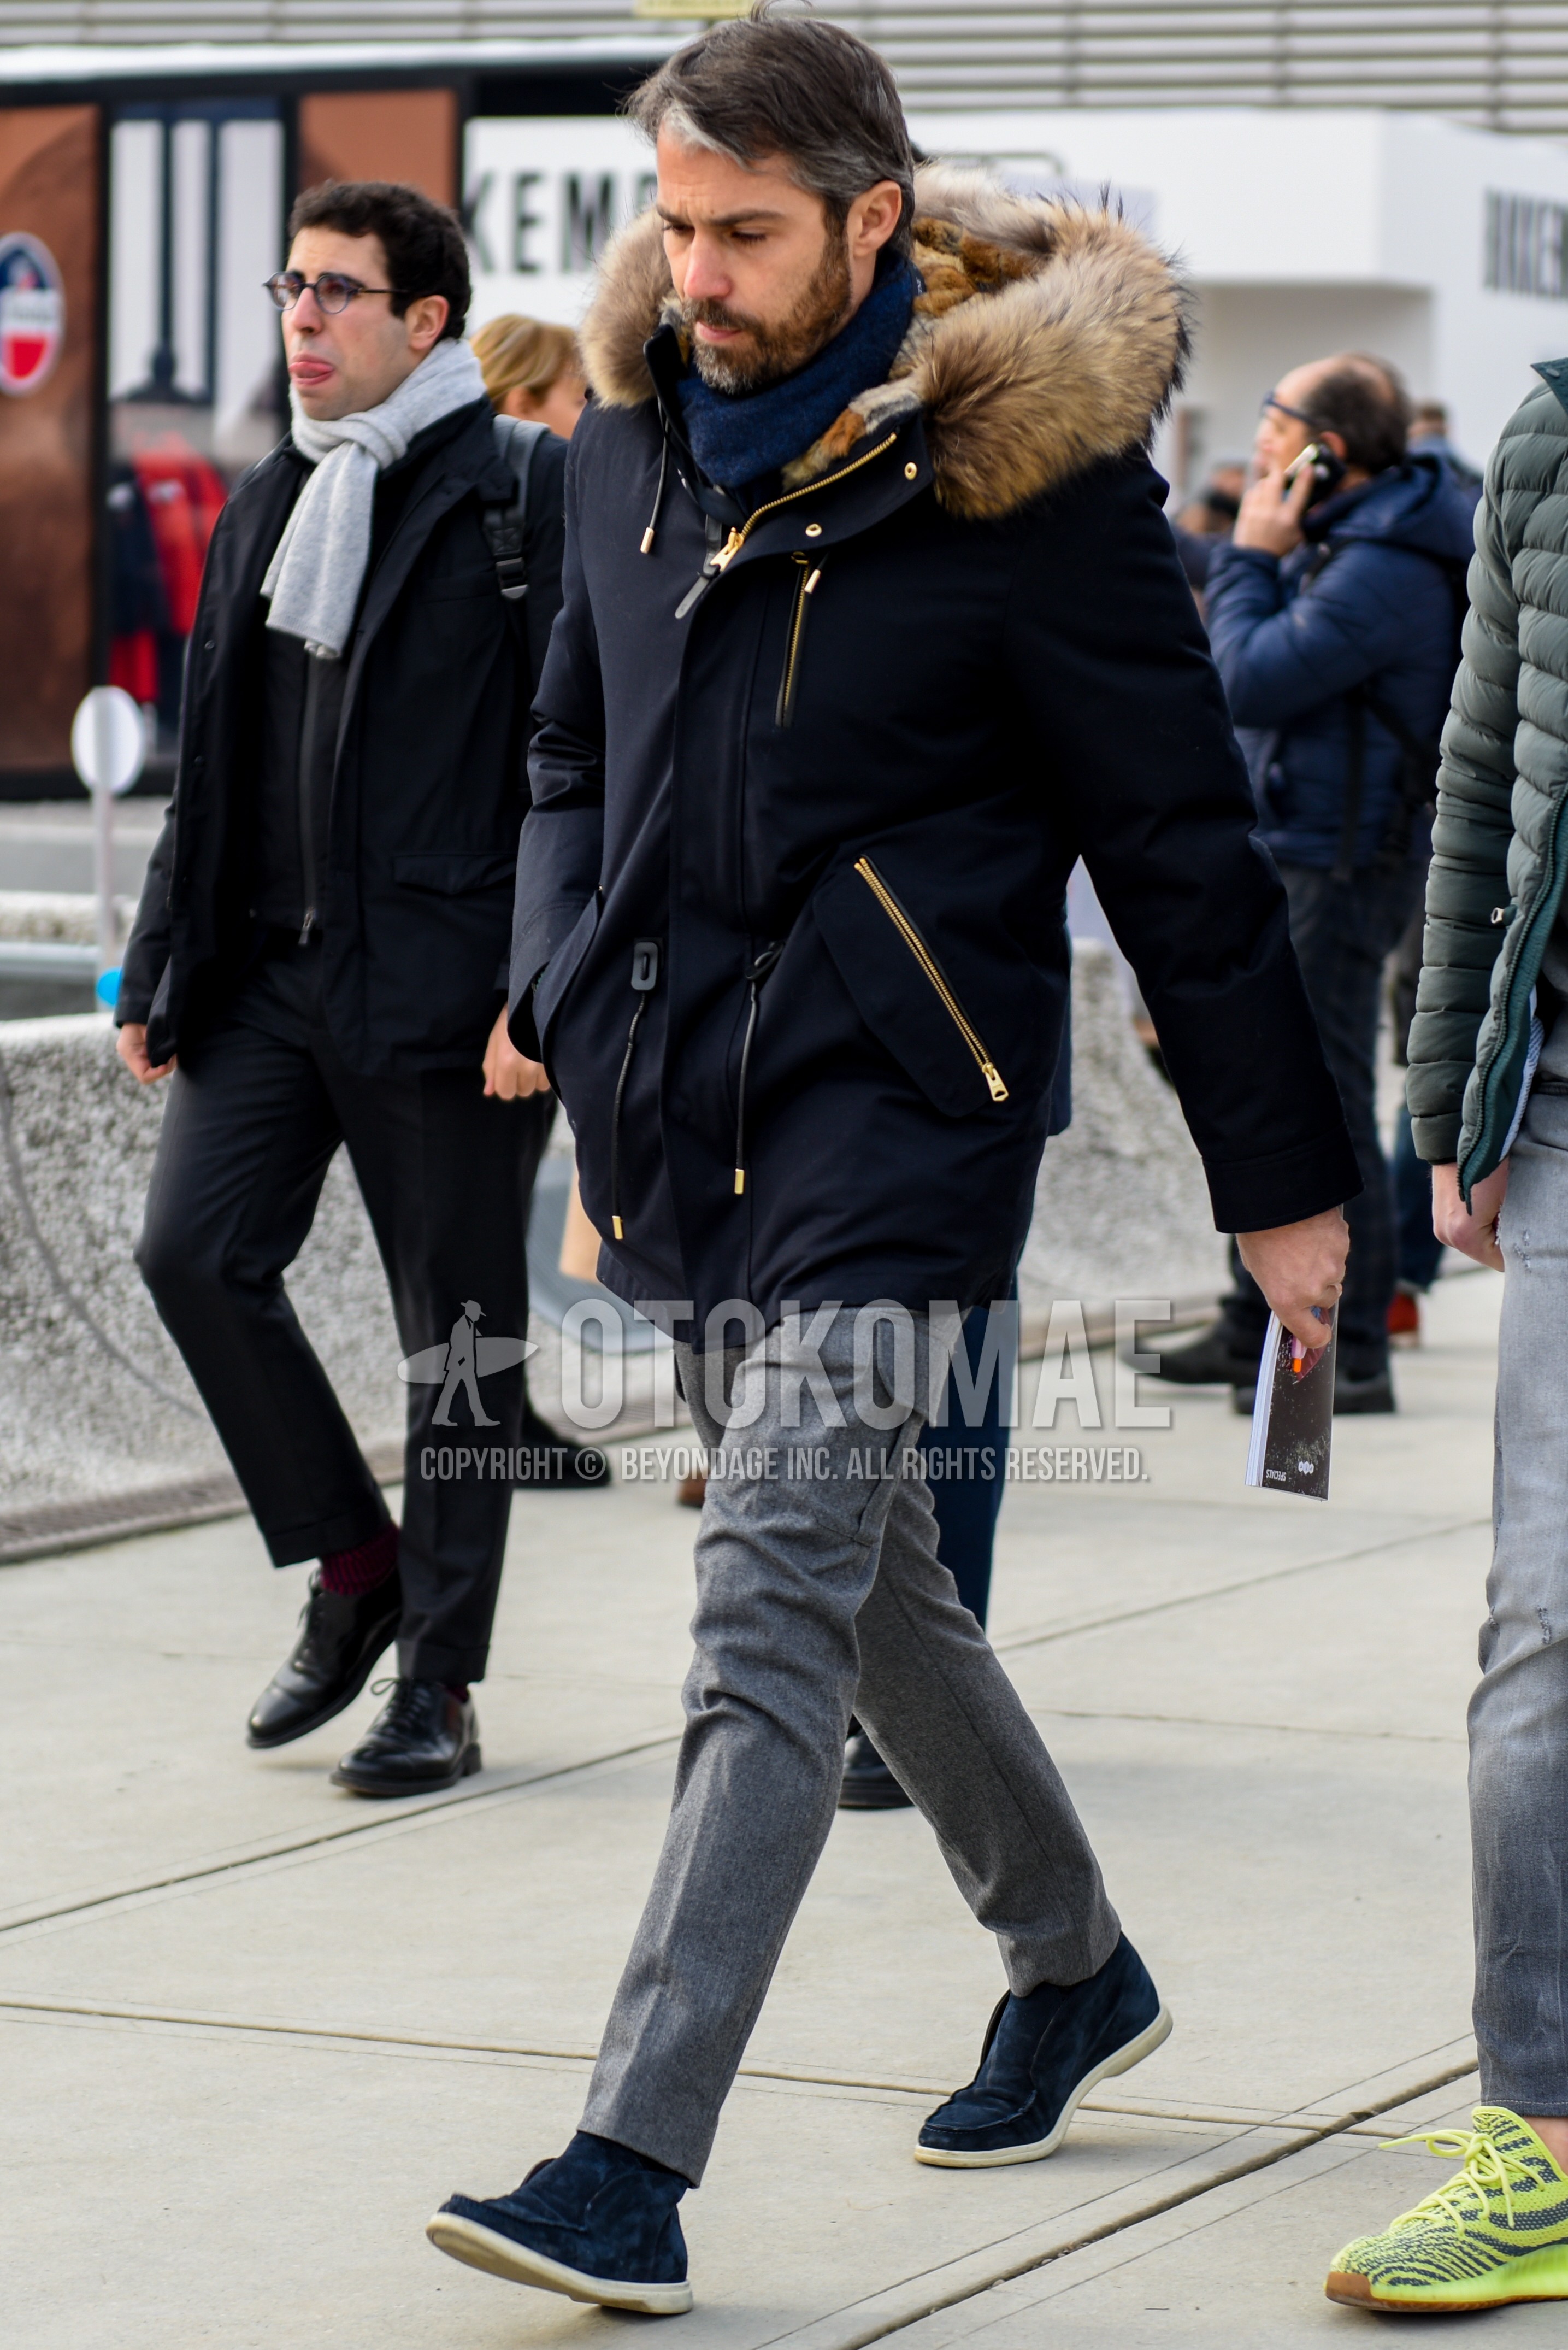 Men's winter outfit with navy plain scarf, black plain down jacket, gray plain slacks, gray plain cargo pants, navy high-cut sneakers.